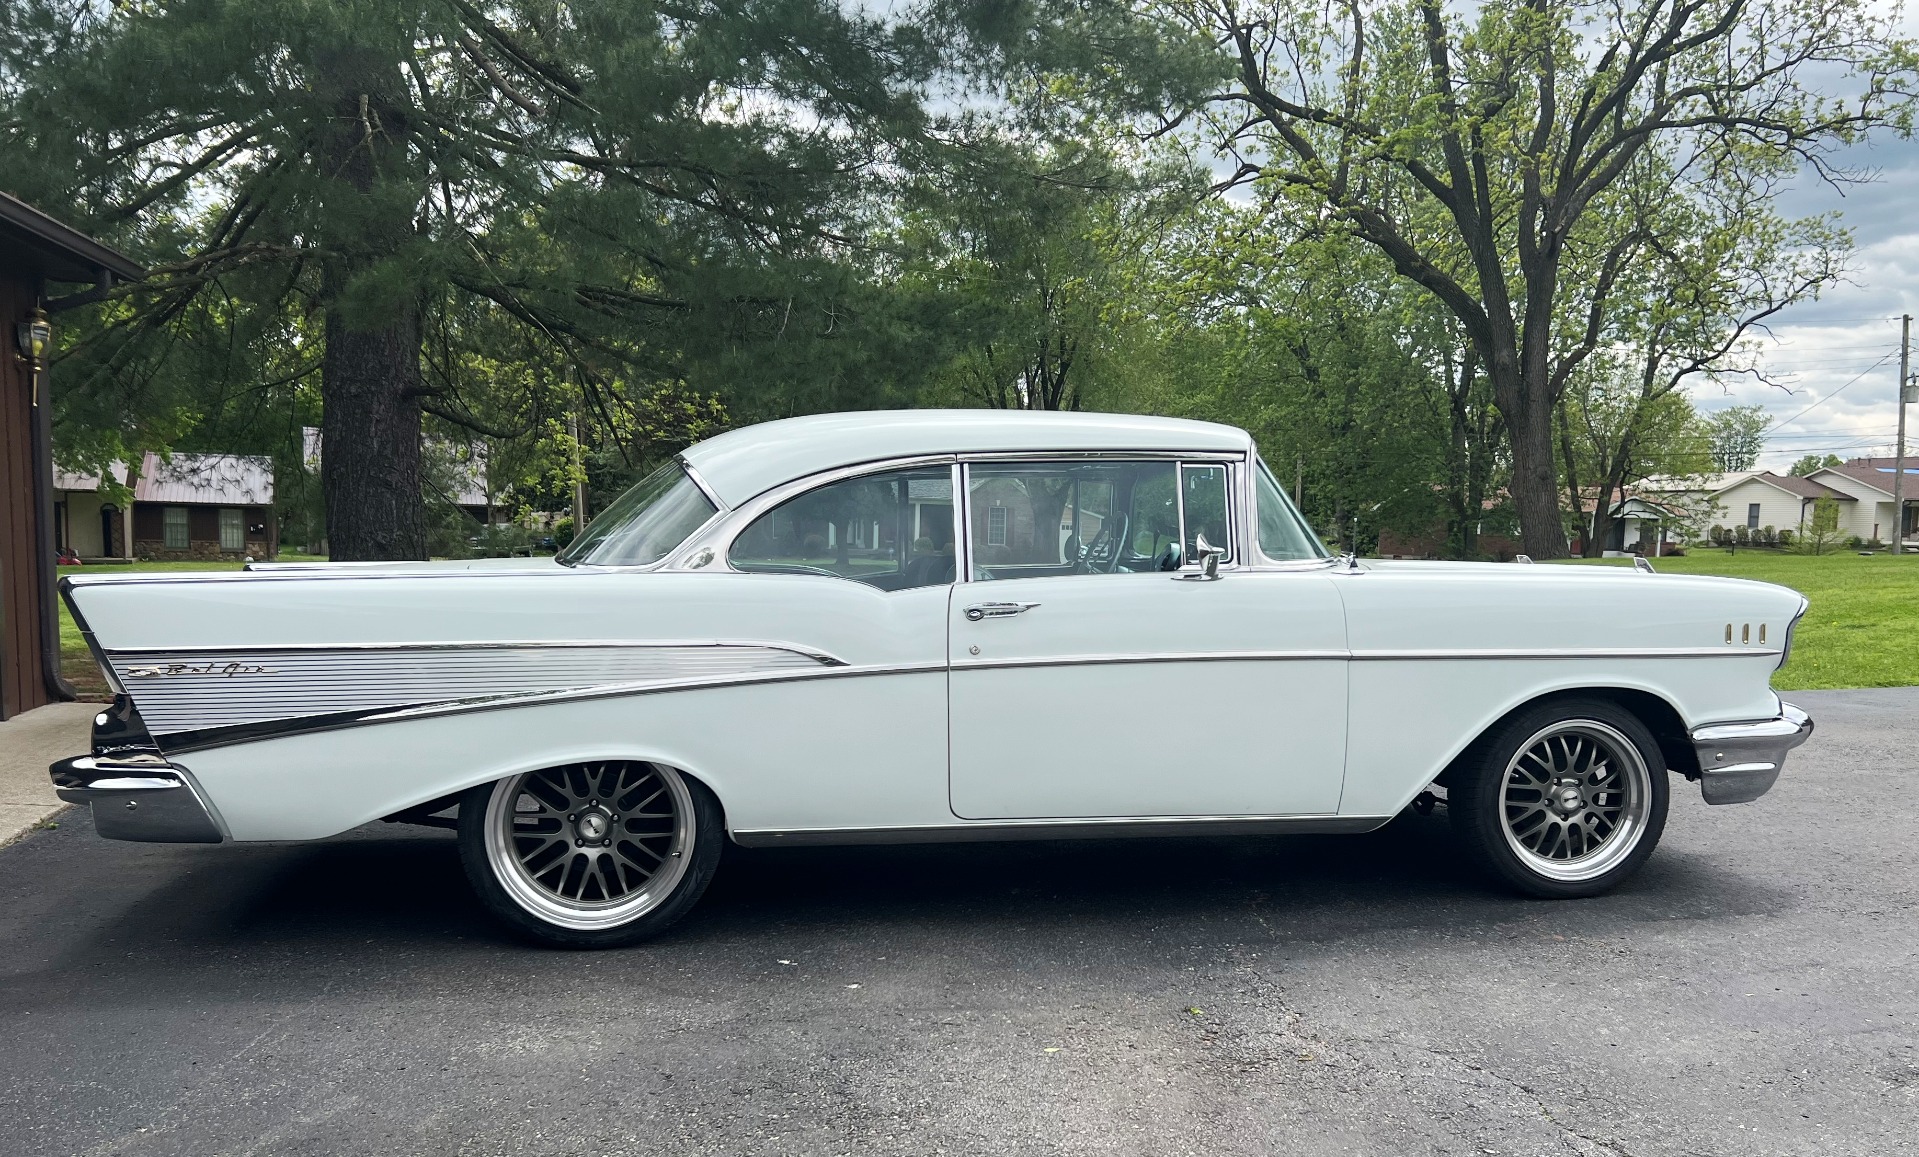 Used 1957 Chevrolet Bel Air  237 , For Sale $55000, Call Us: (704) 996-3735